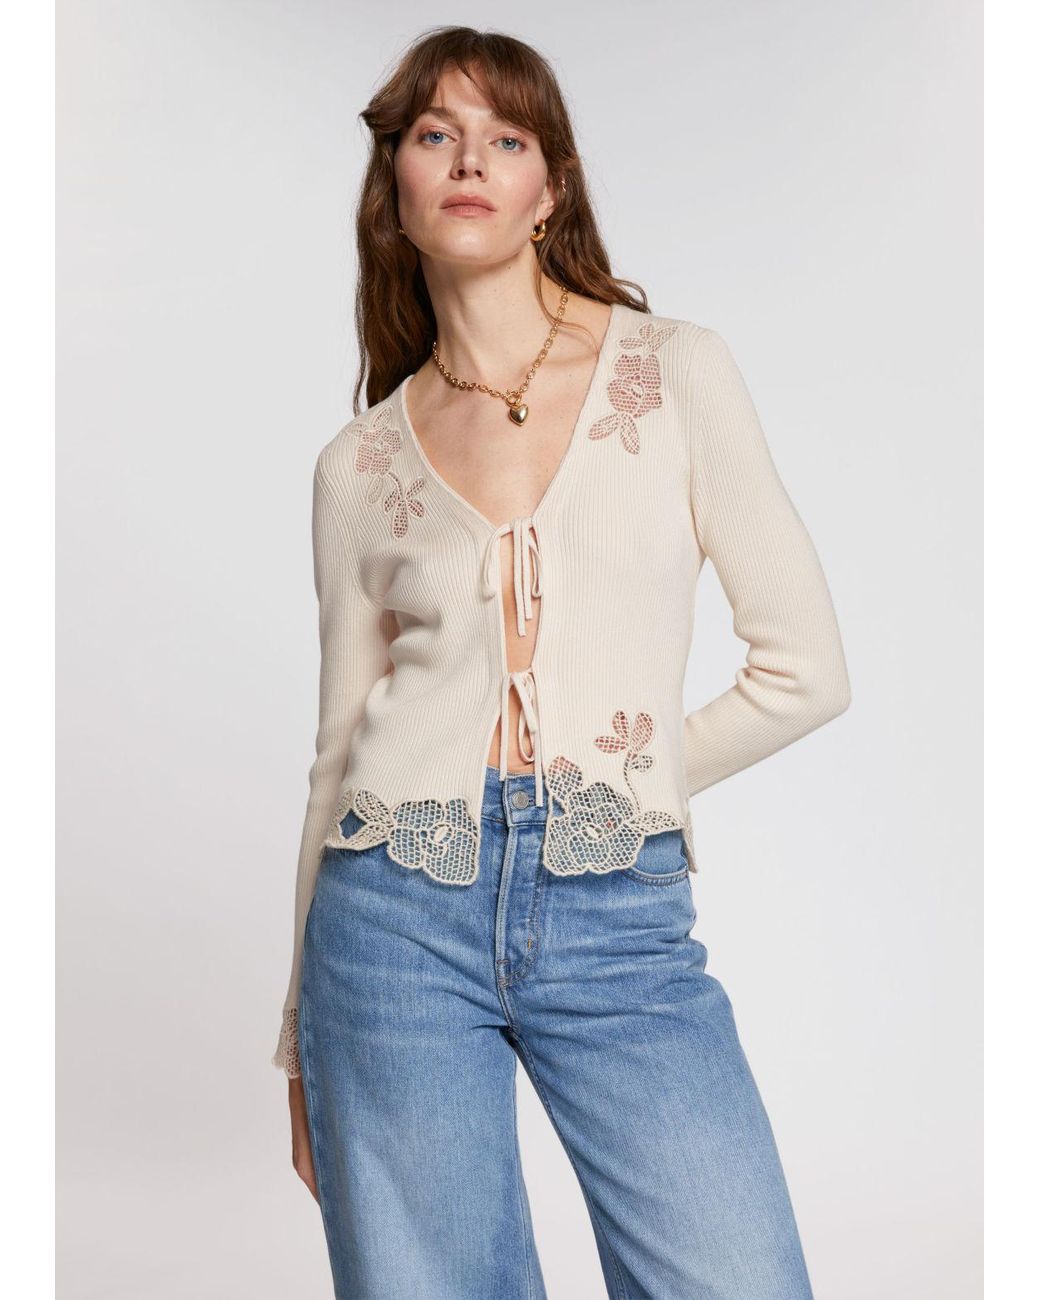 & Other Stories Floral Lace Embellished Cardigan in Blue | Lyst